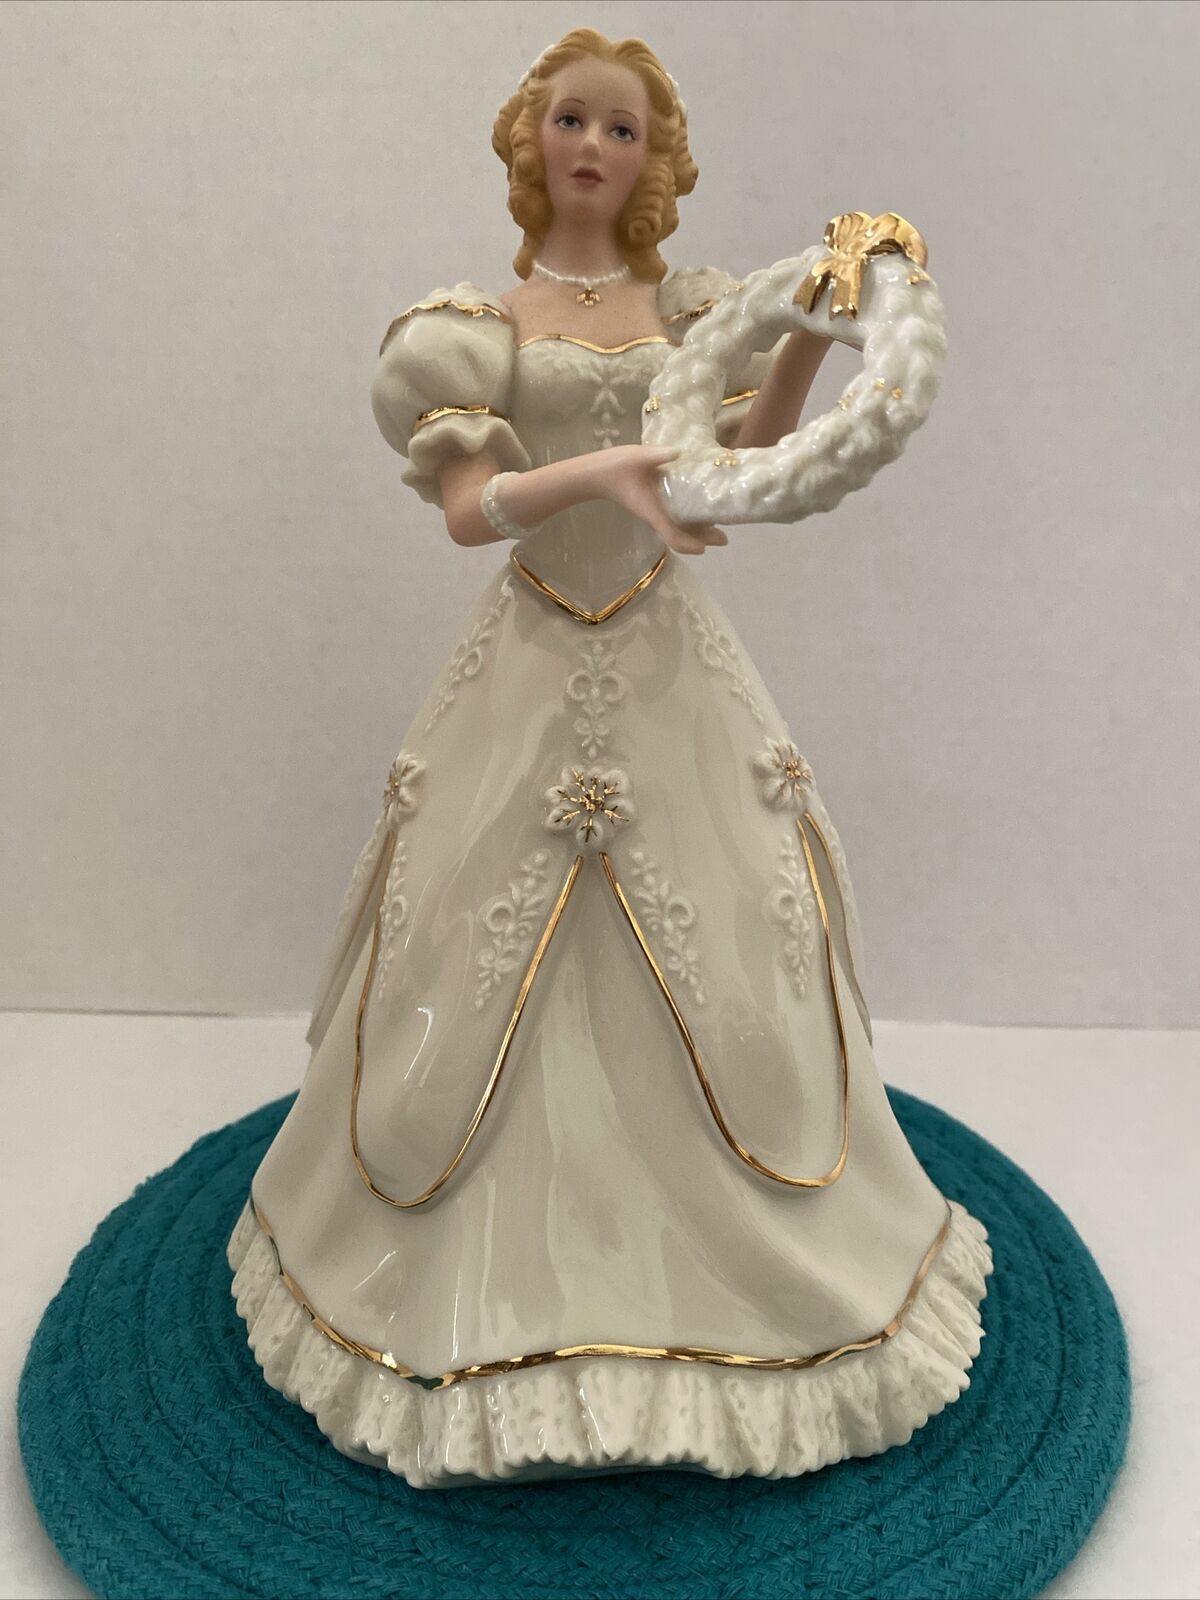 Lenox “A Christmas Welcome” Ivory Classic Limited Edition 1999 Figurine- MINT